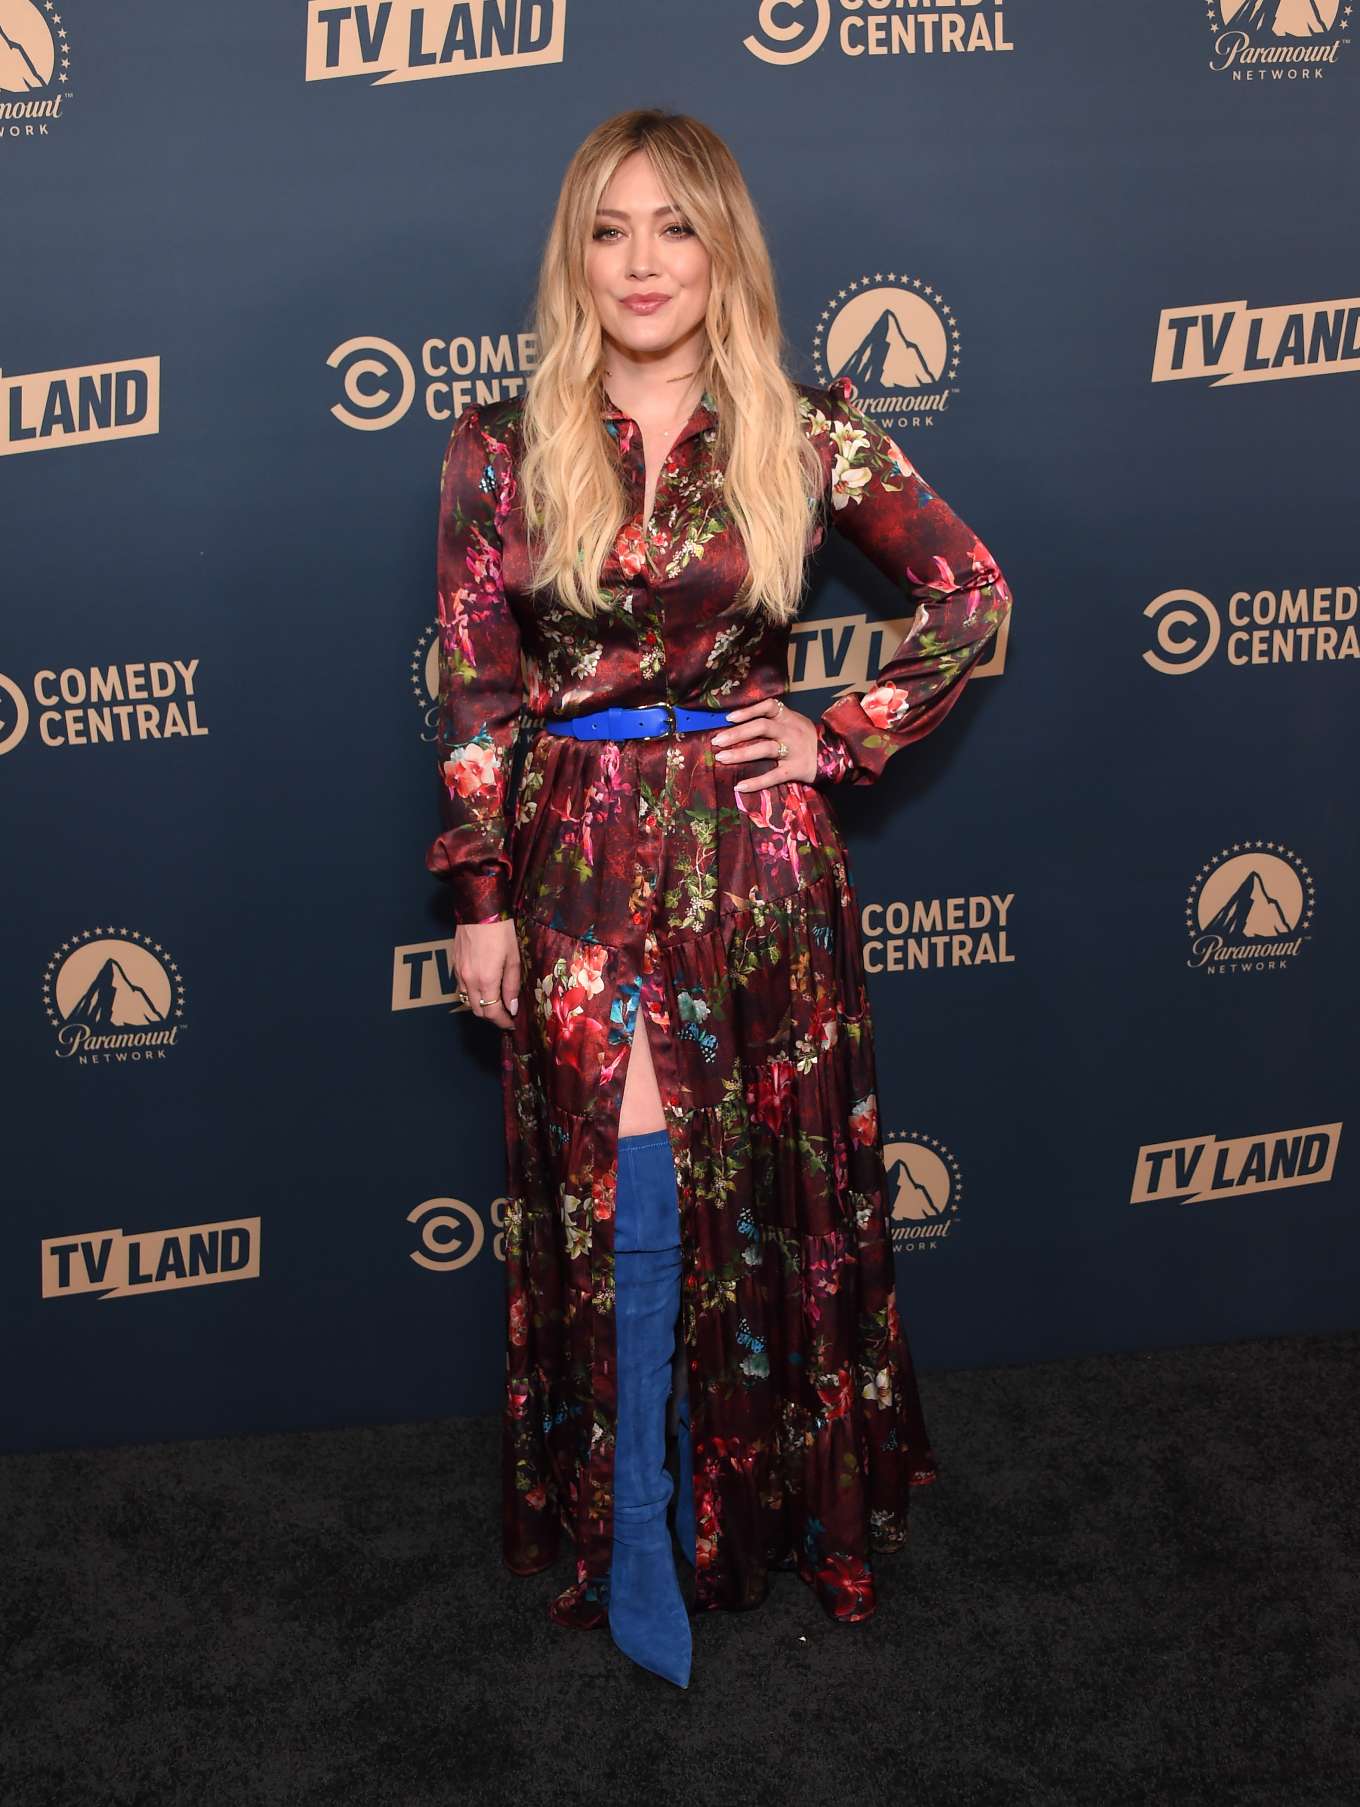 Hilary Duff â€“ Comedy Central, Paramount Network and TV Land Press Day in LA